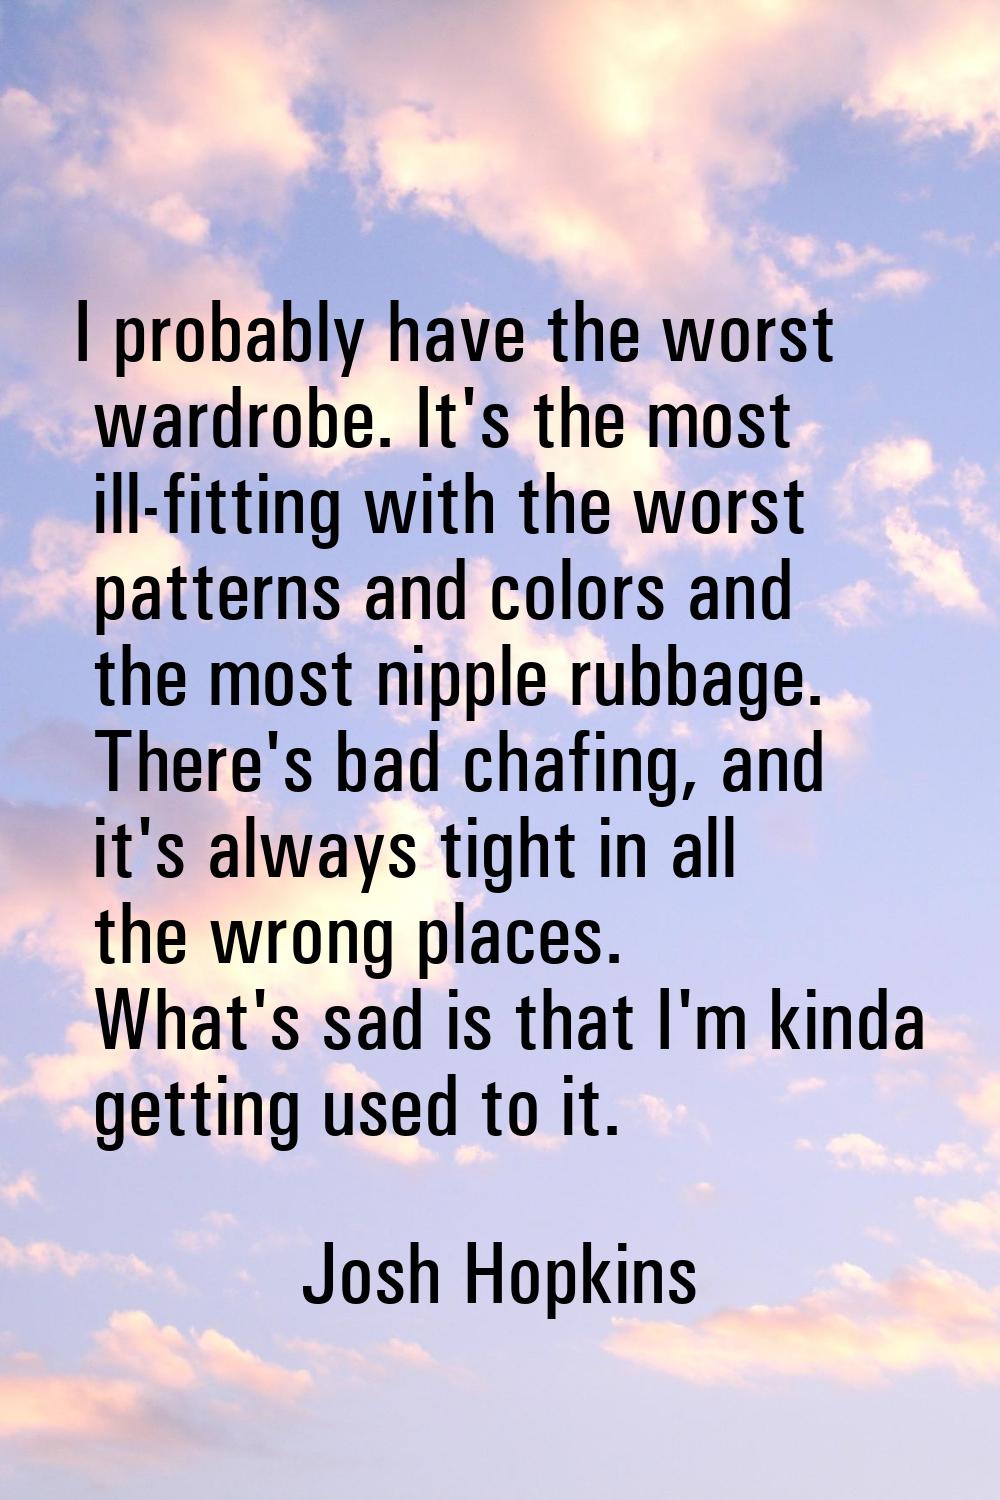 I probably have the worst wardrobe. It's the most ill-fitting with the worst patterns and colors an